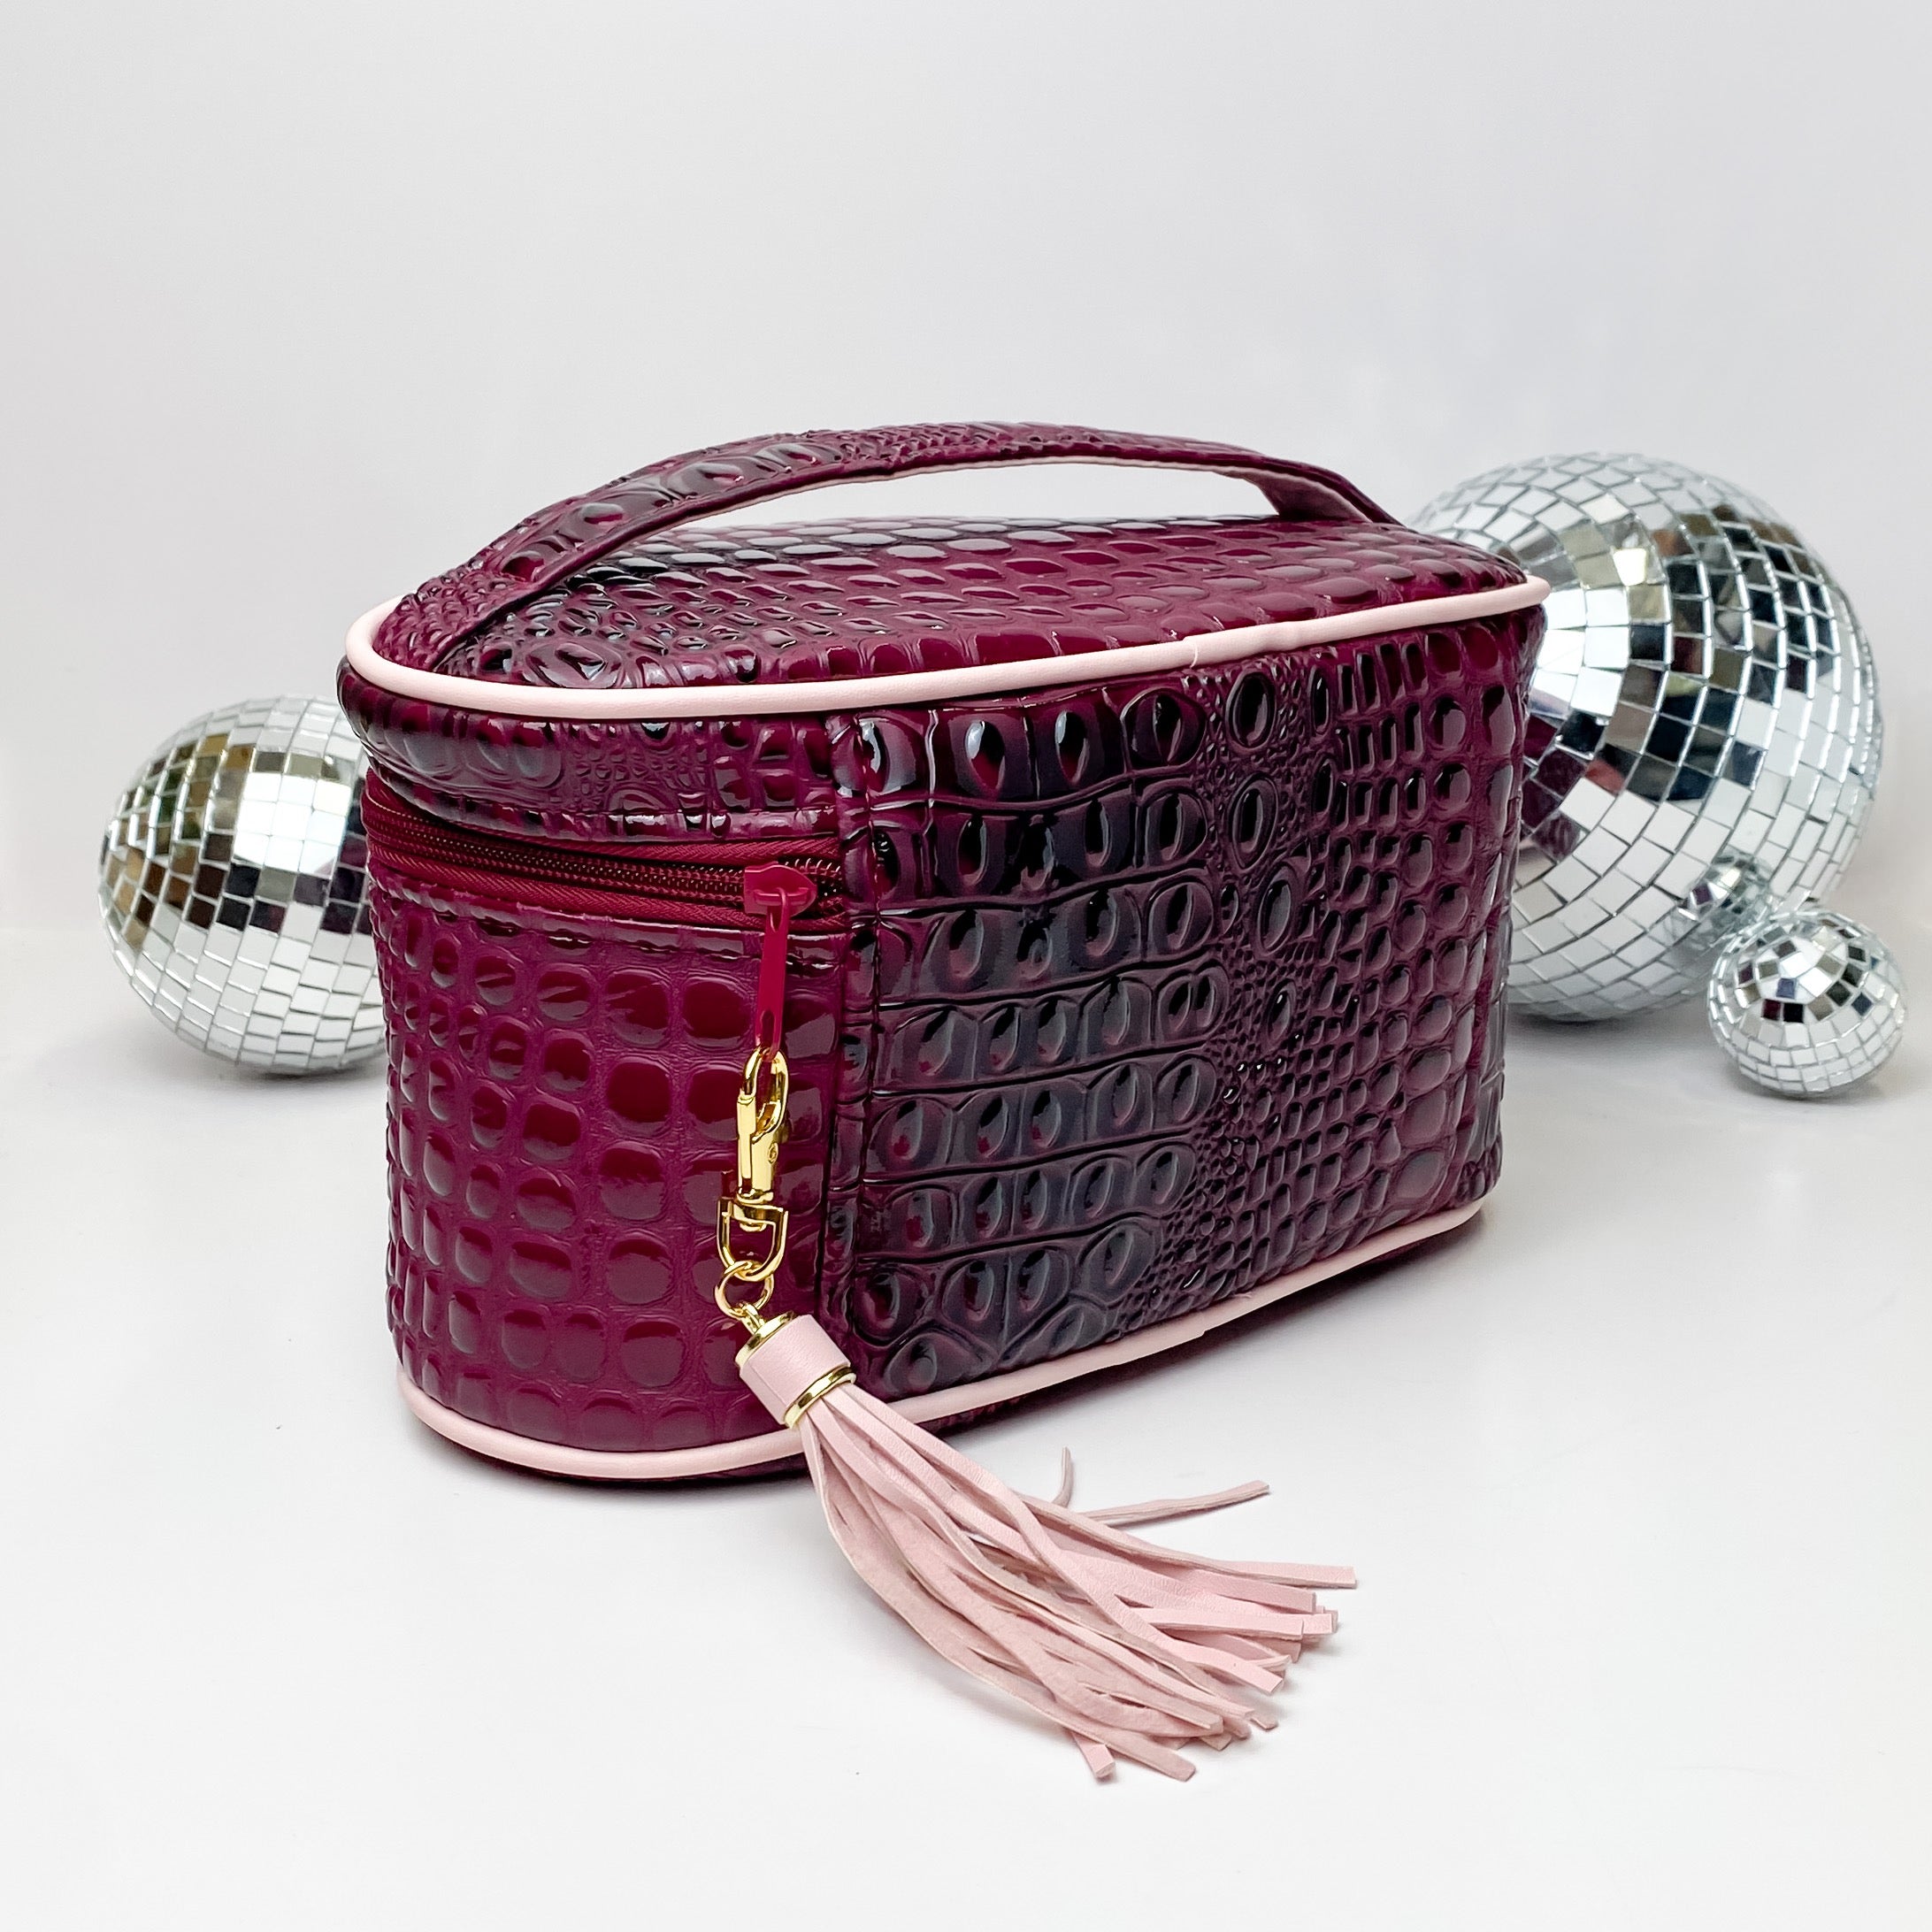 Makeup Junkie | Small Bubble Gator Print Train Case in Maroon - Giddy Up Glamour Boutique